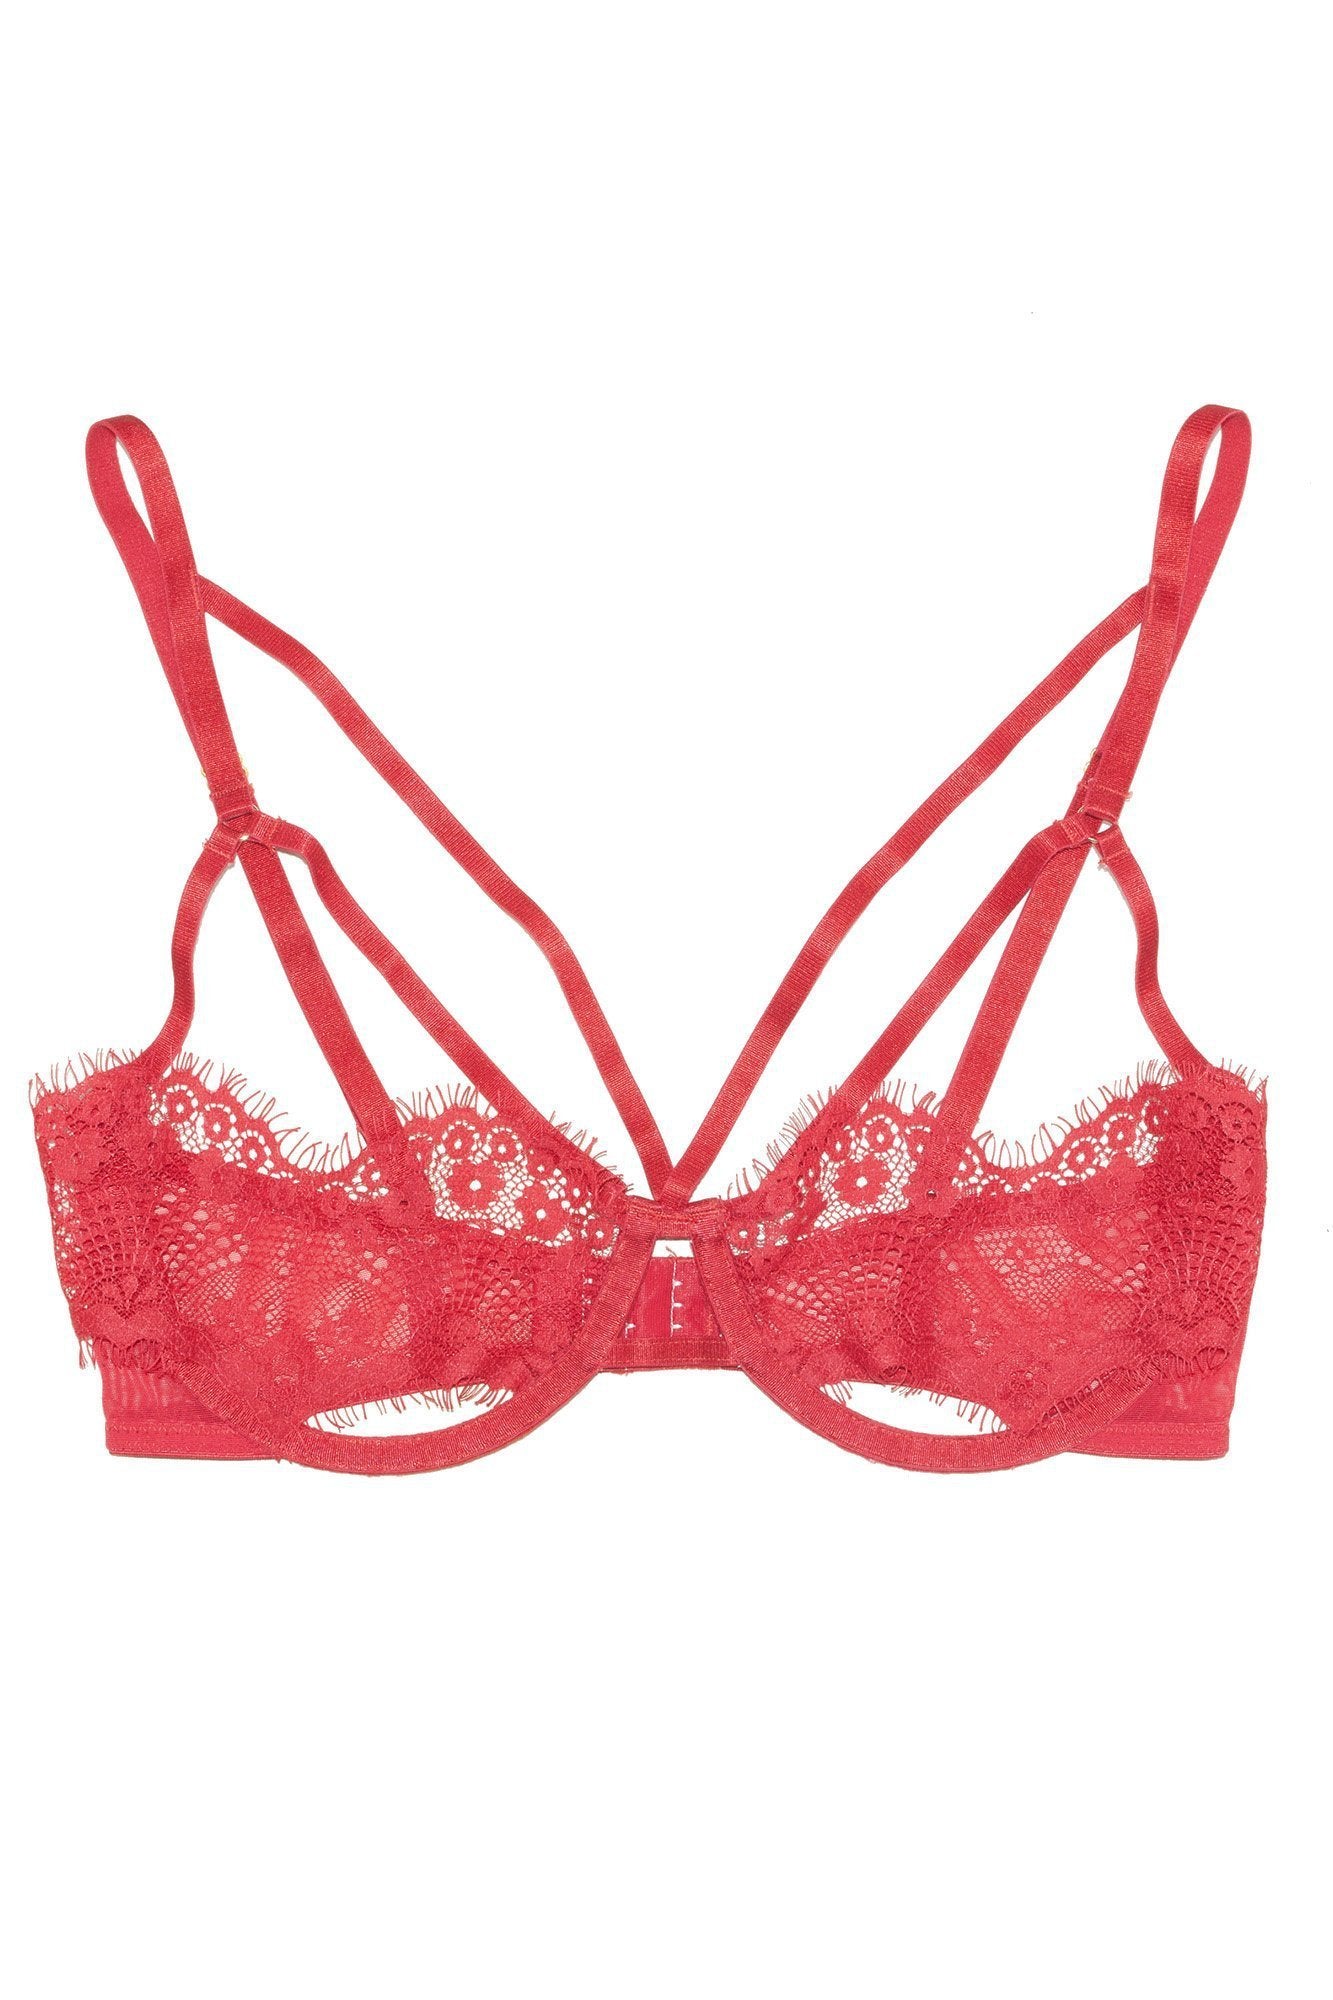 Wolf & Whistle Brody red lace open cup bra - Playful Promises